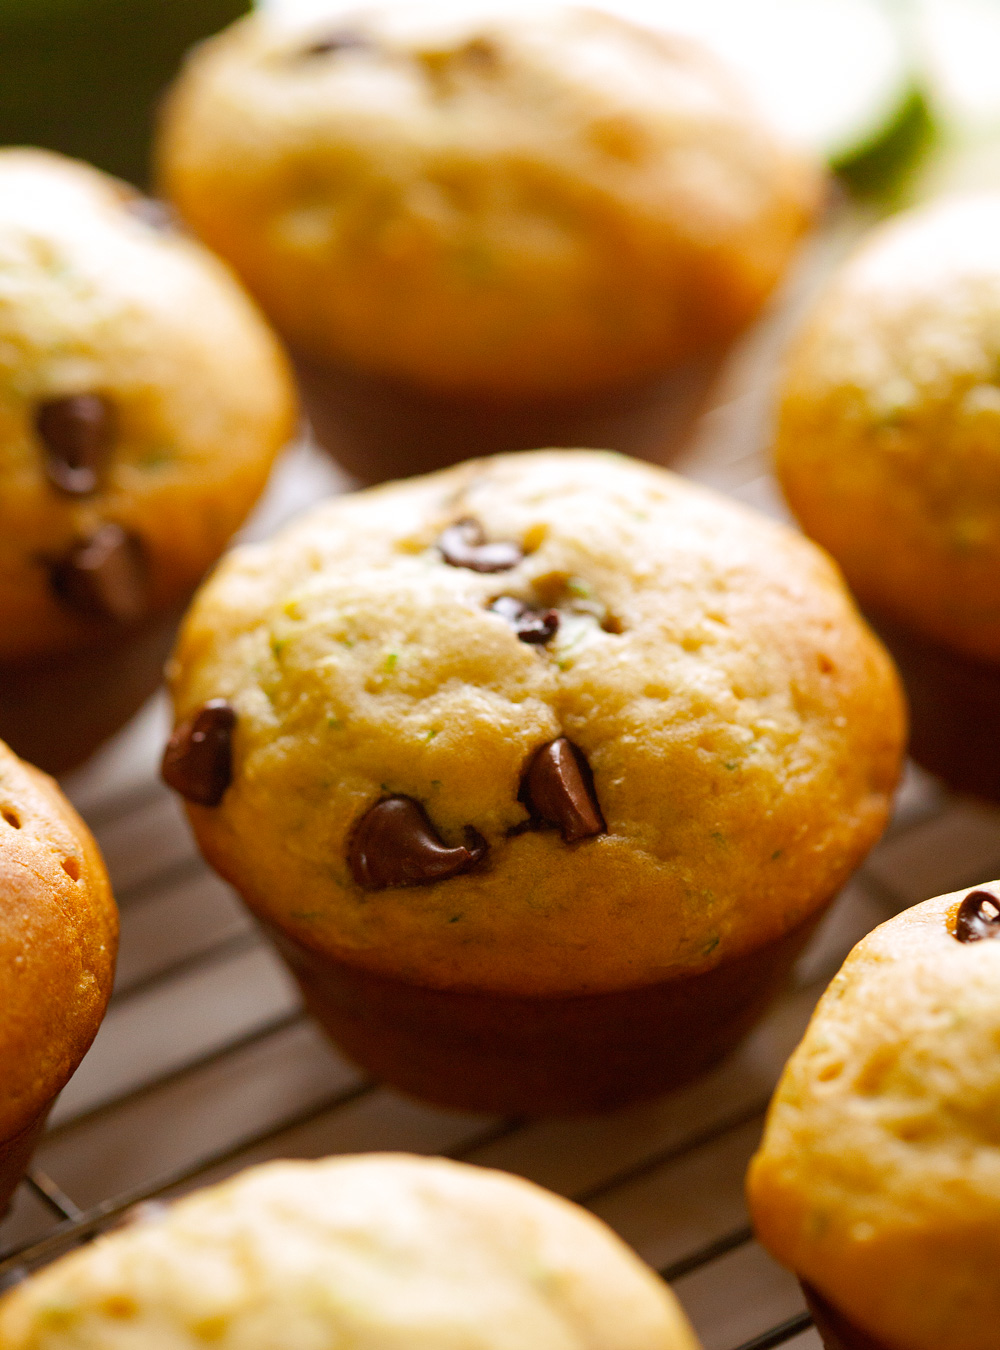 Zucchini Chocolate Chip Muffins… these are simple to make, taste delicious and a great way to use up some zucchini!